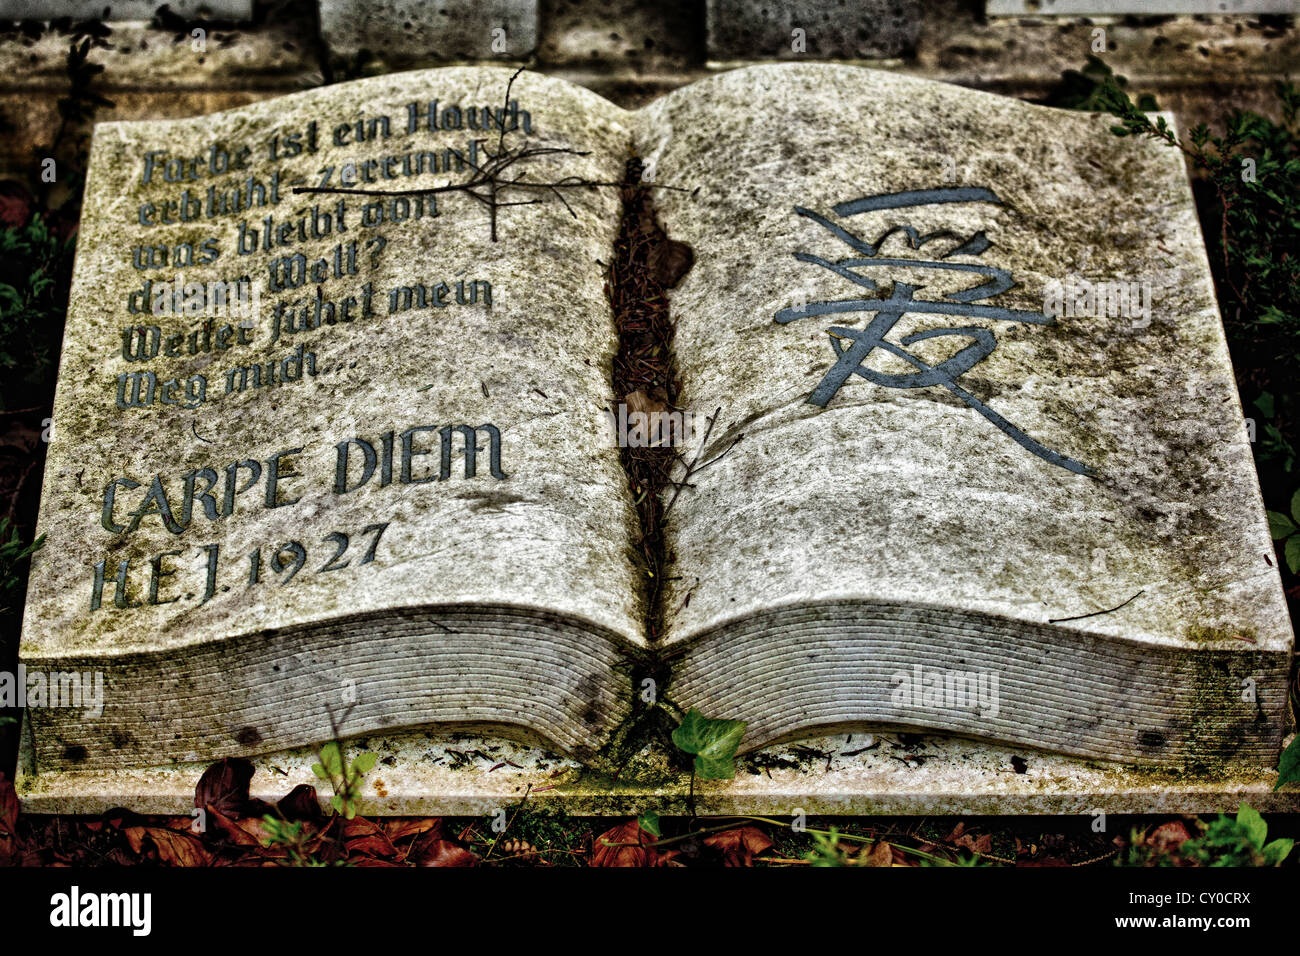 Stone book inscribed with carpe diem at the Historical Cemetery in Weimar, Thuringia Stock Photo